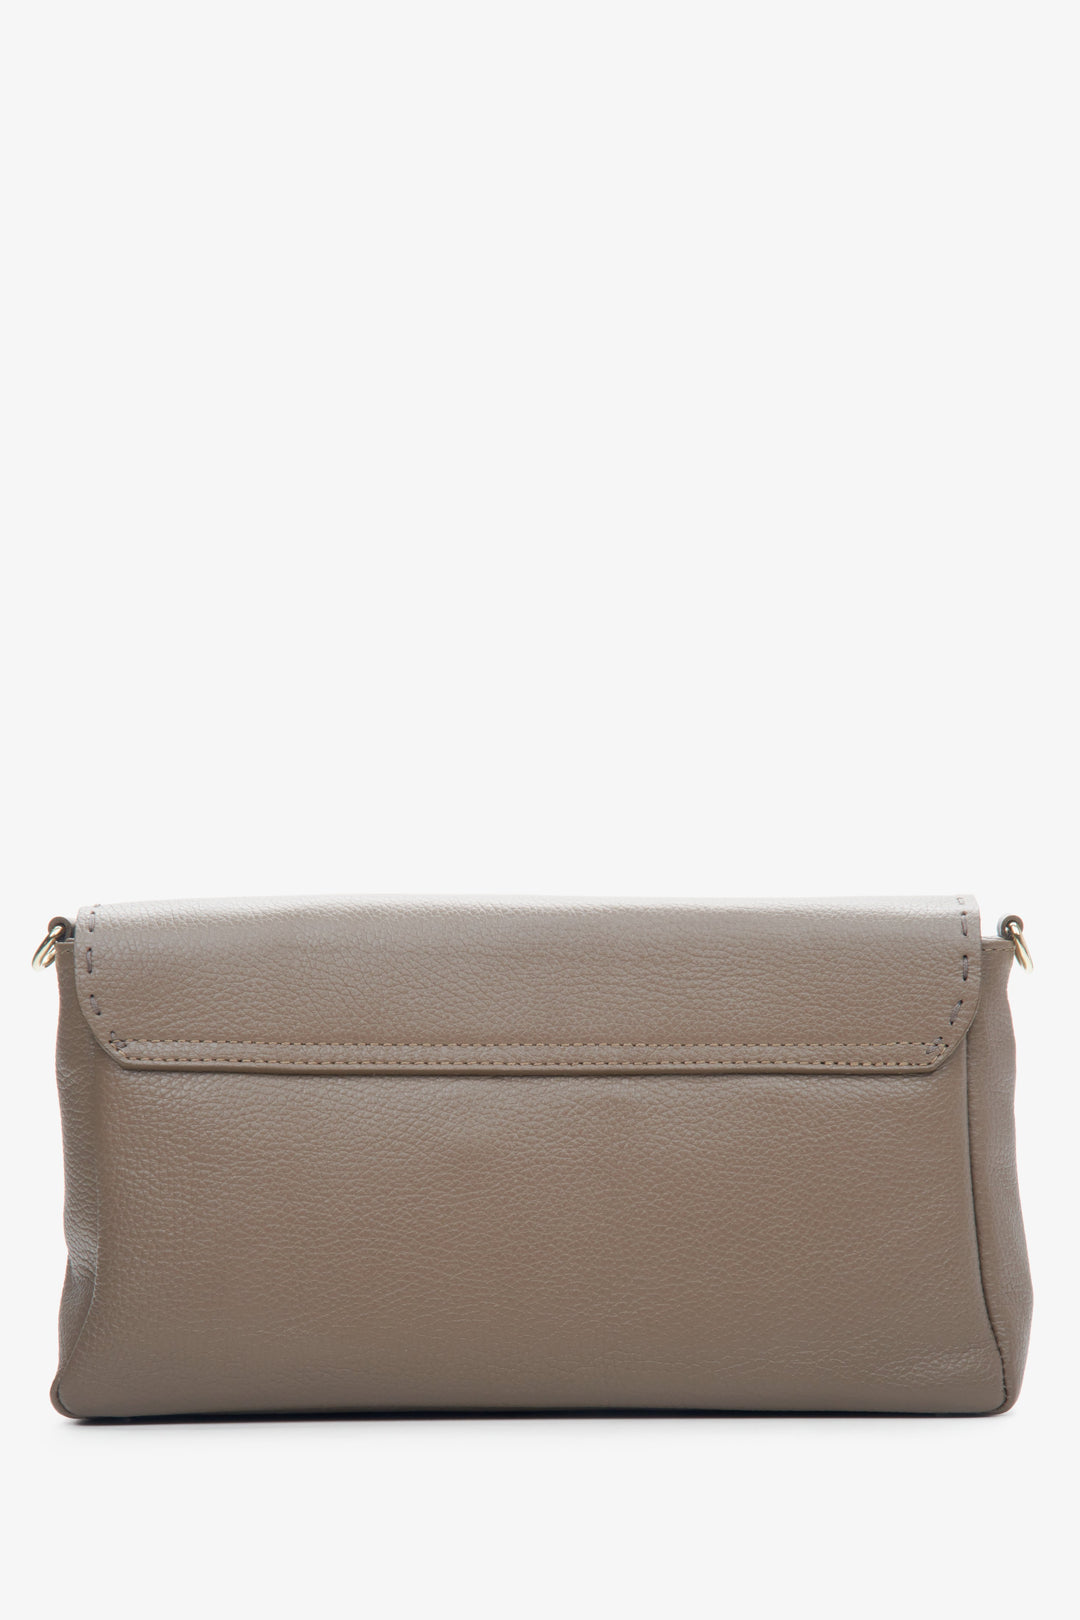 Women's small grey and beige handbag made of genuine leather by Estro - back view.